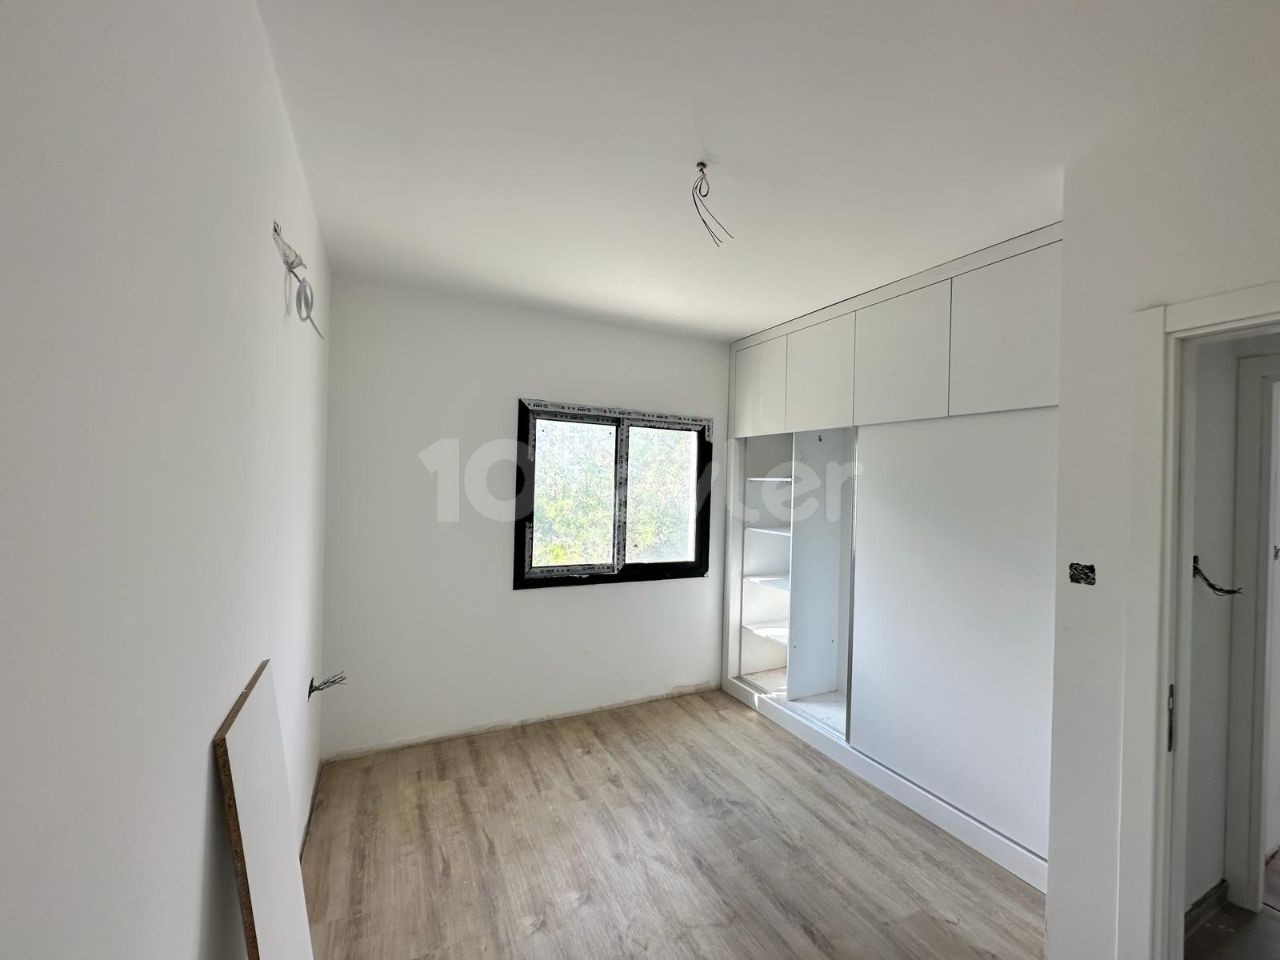 2+1 and 3+1 flats for sale in Kyrenia